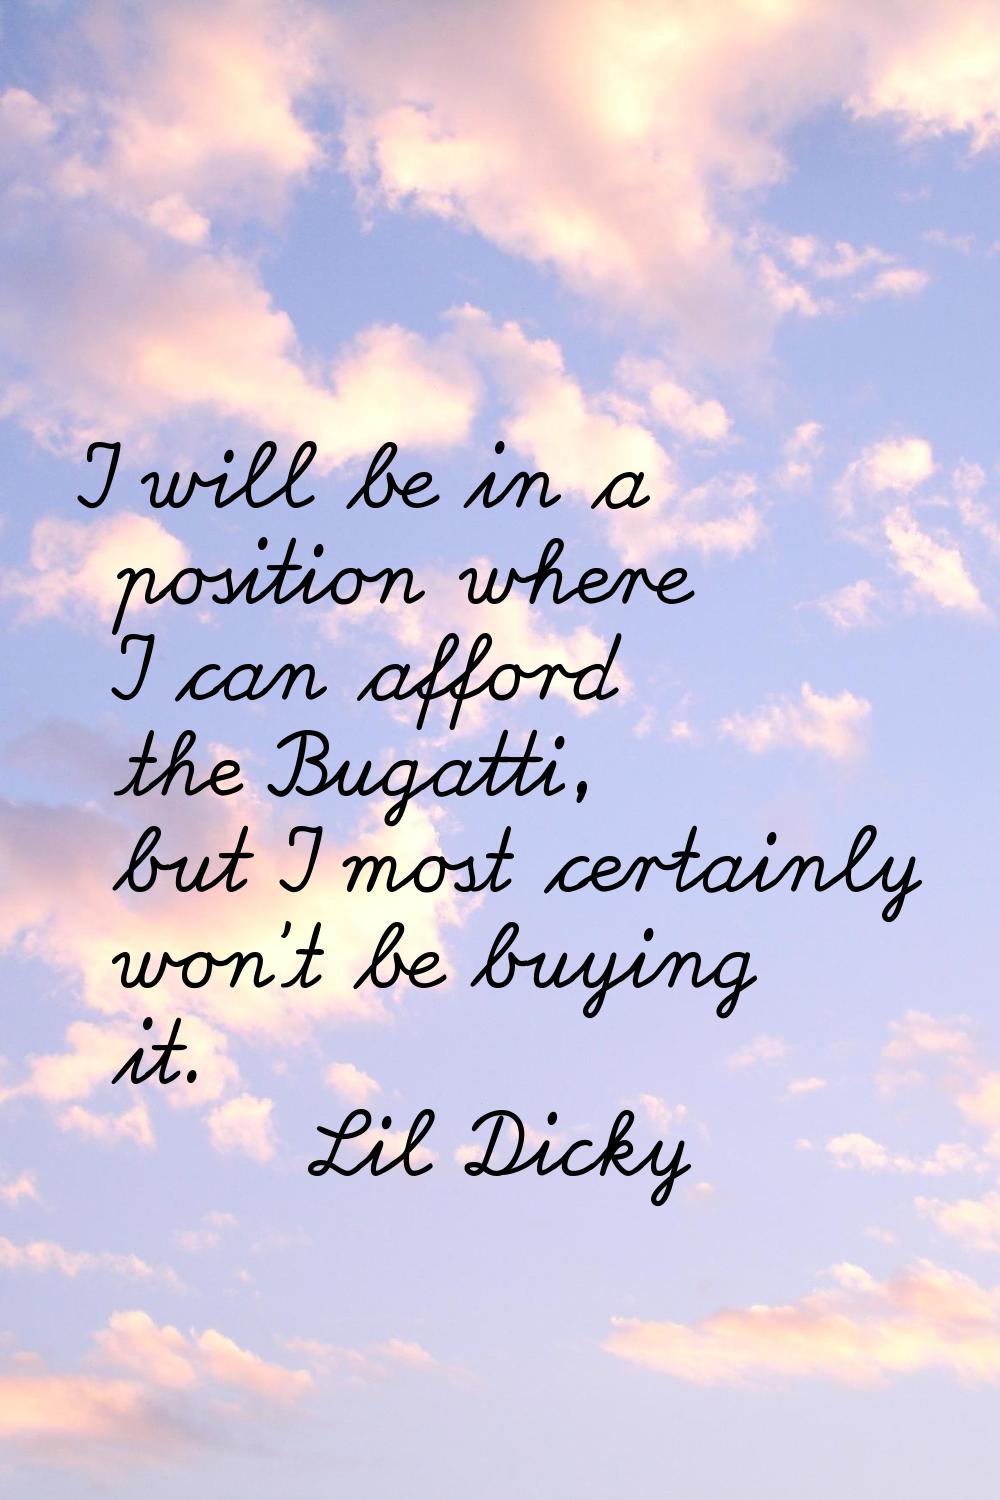 I will be in a position where I can afford the Bugatti, but I most certainly won't be buying it.